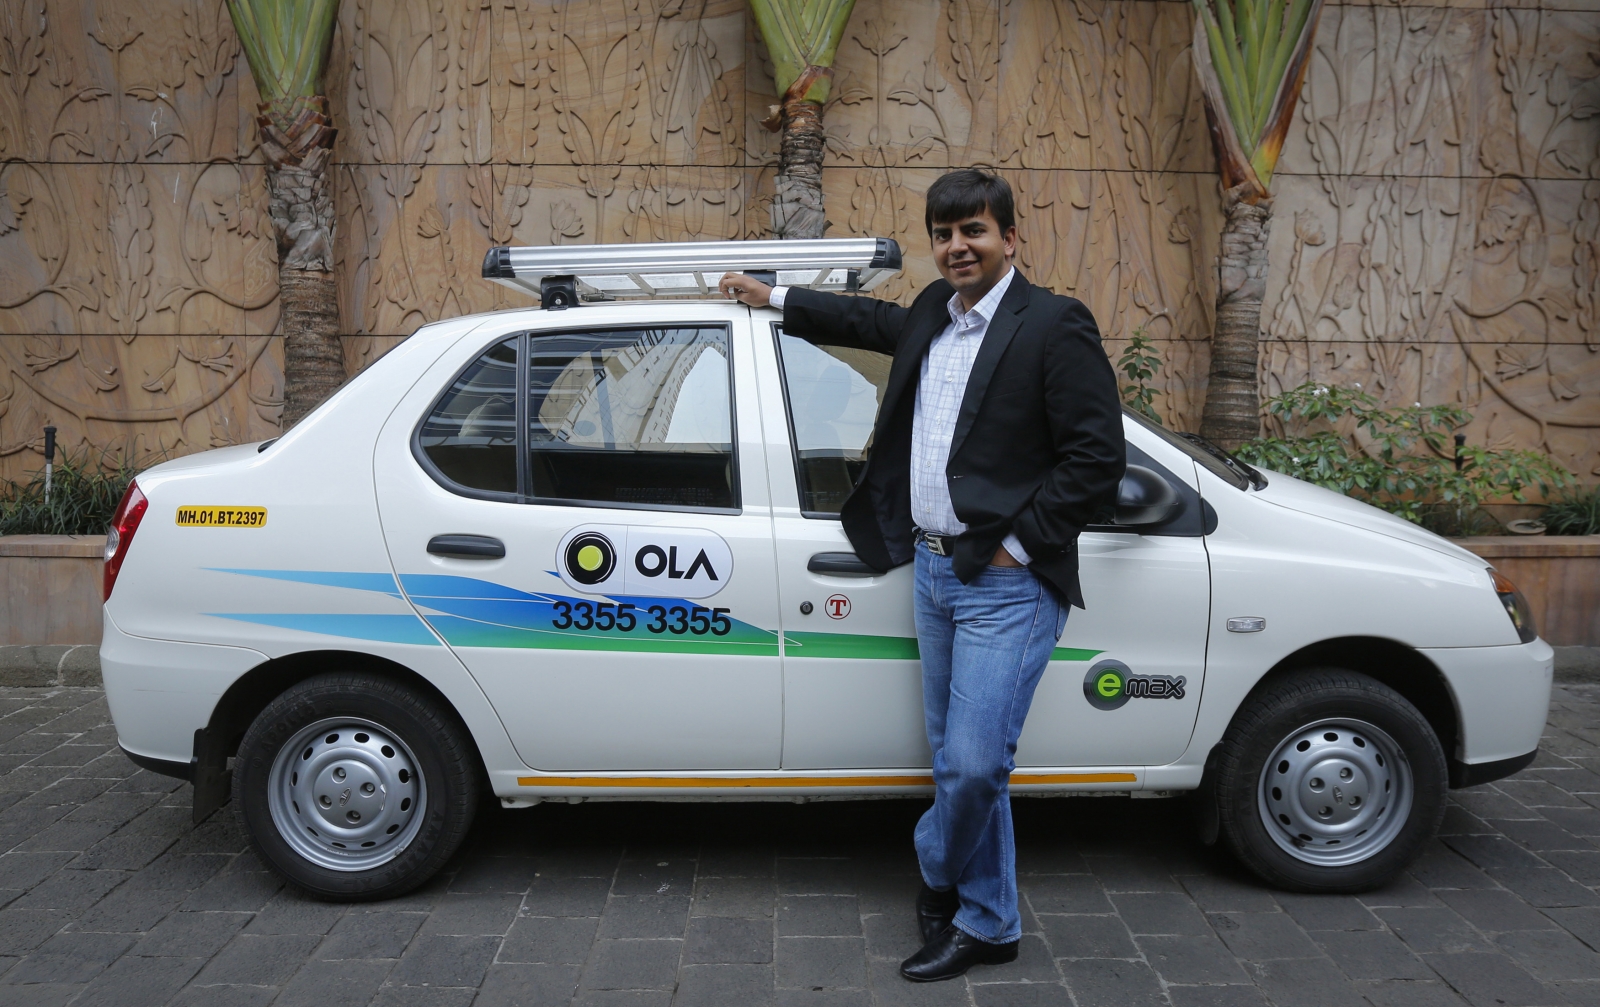 ola-cabs-becomes-third-most-valued-indian-venture-backed-firm-at-2-4bn-ibtimes-uk